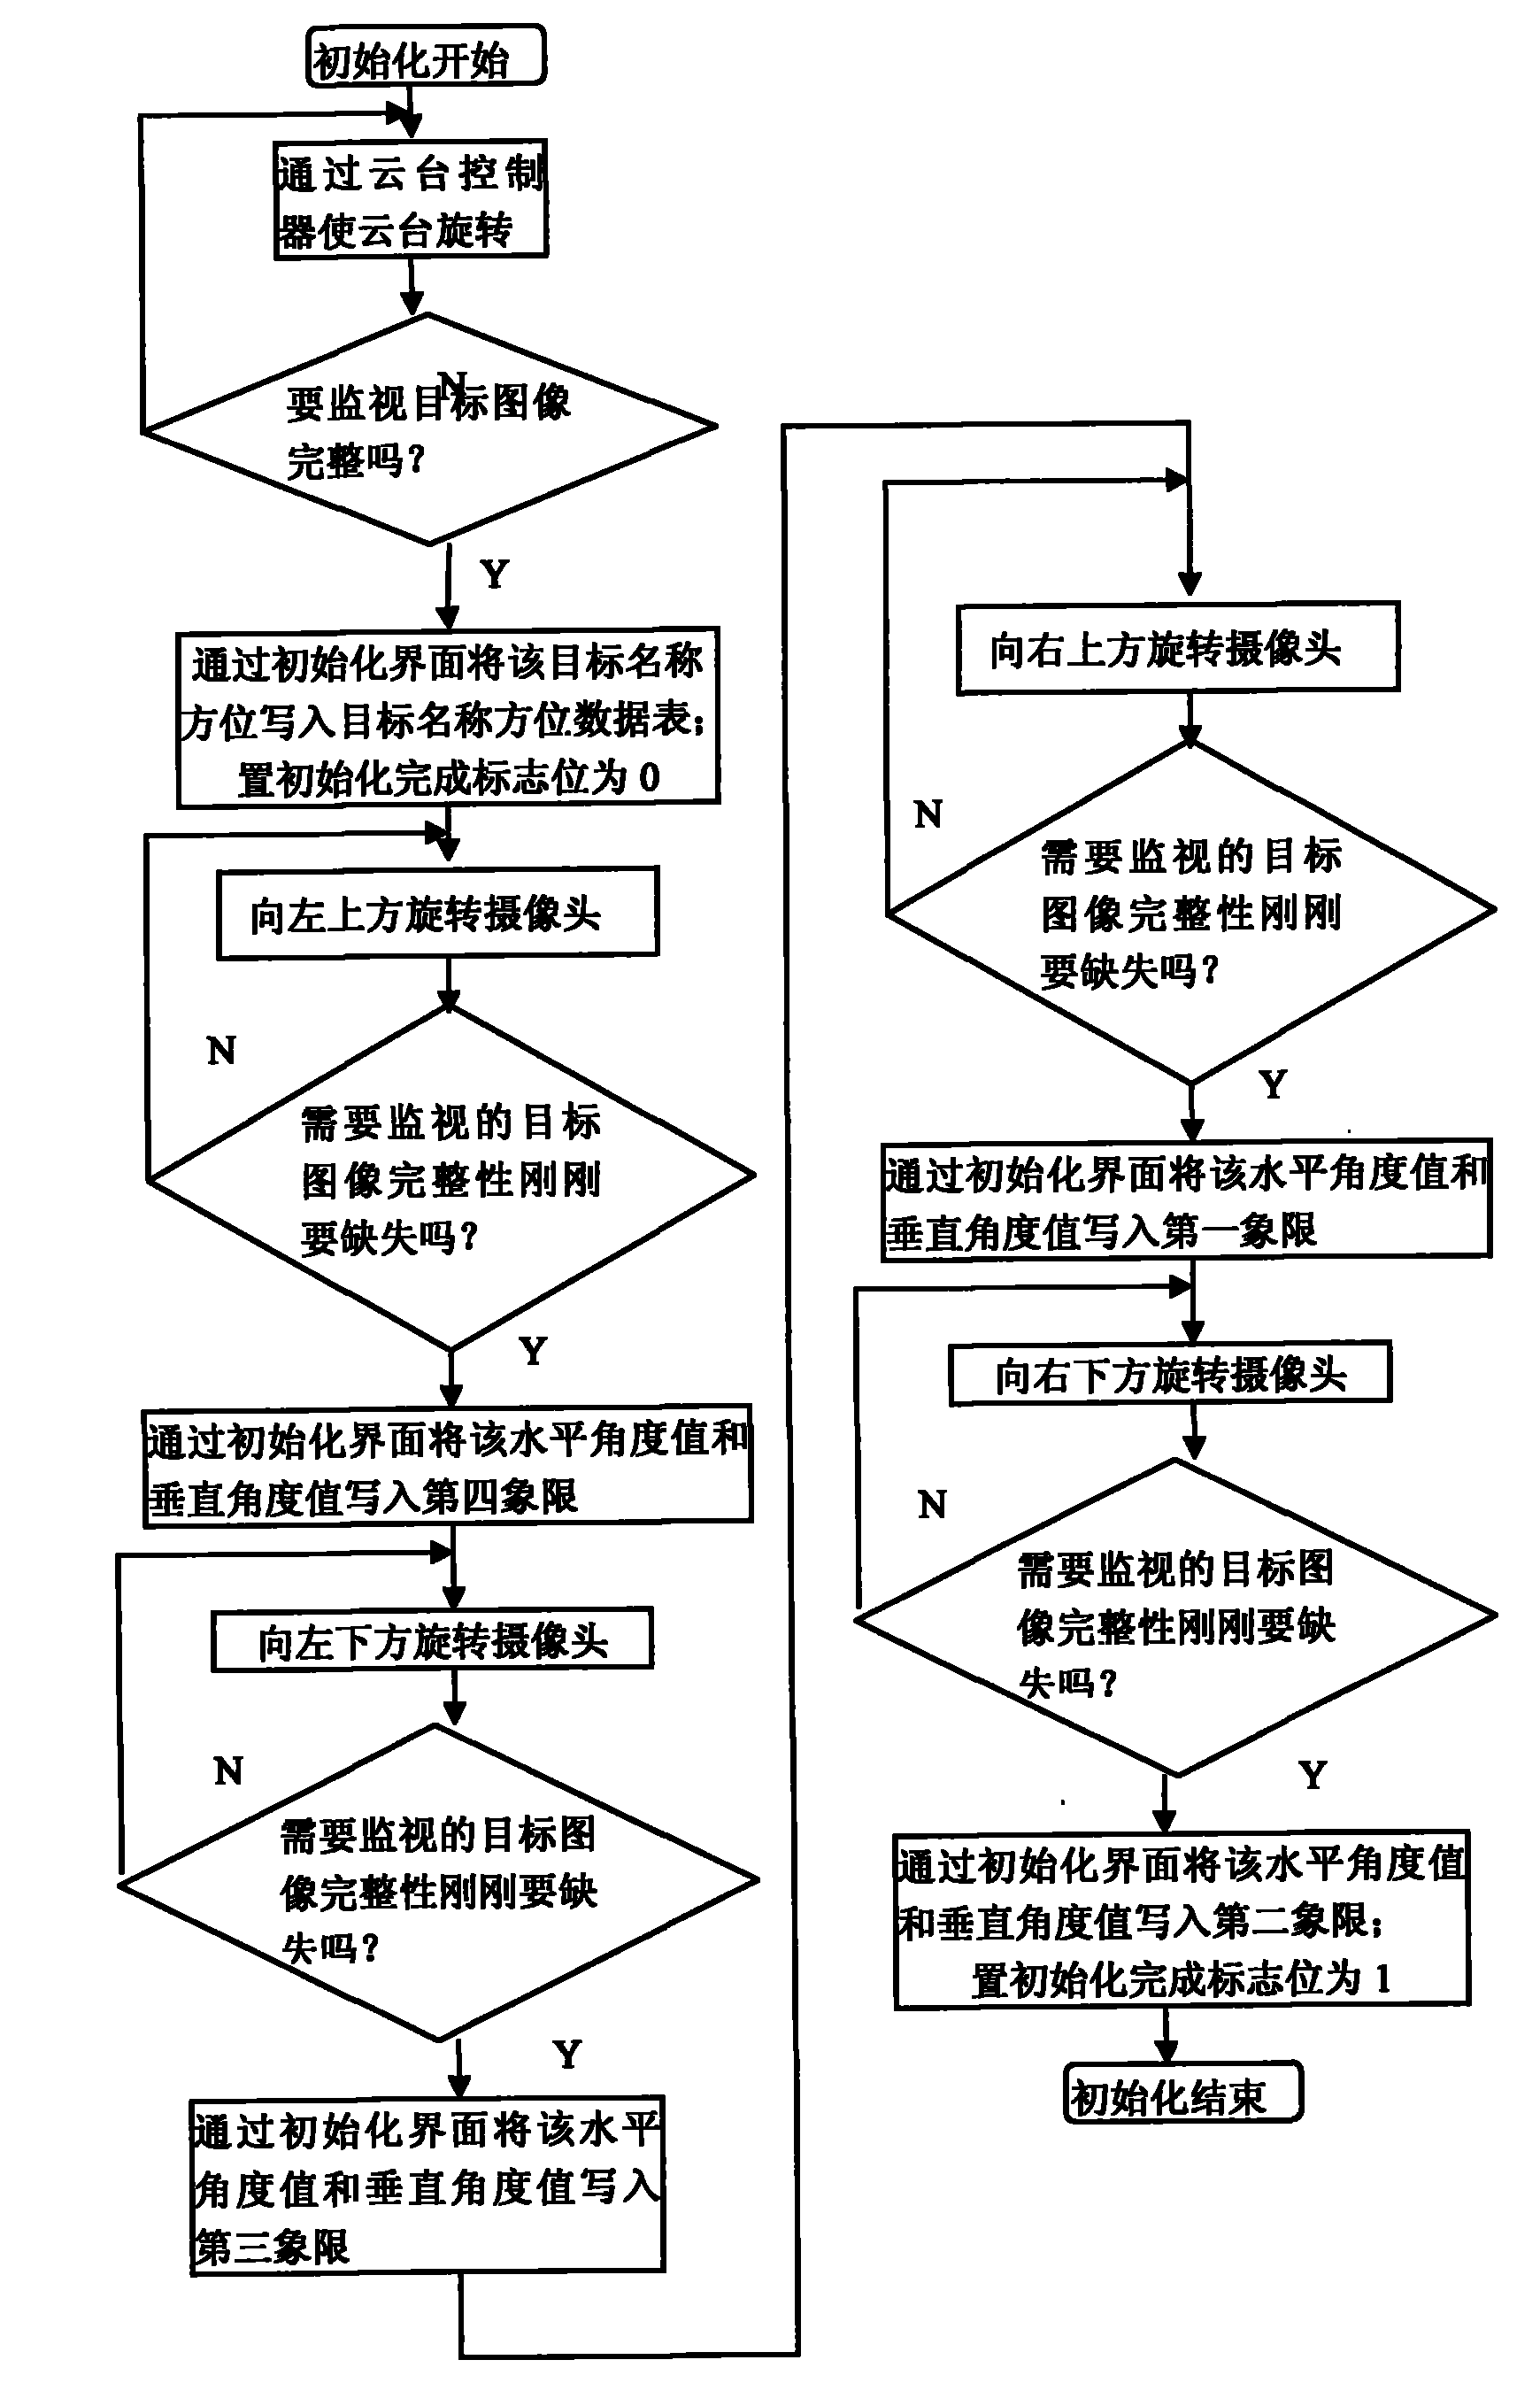 Monitoring system for marking road section information by utilizing vertical and horizontal angles of camera